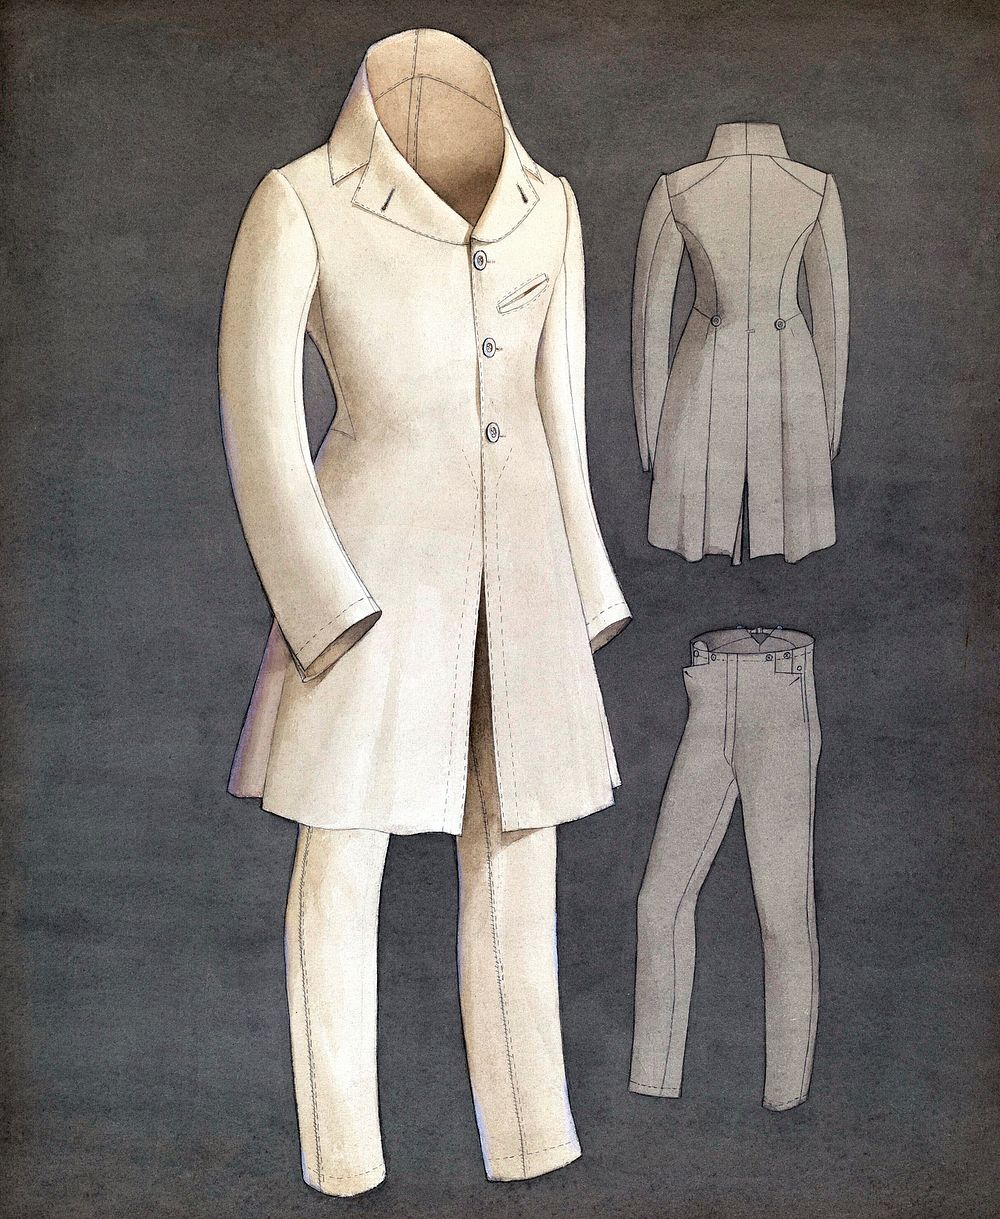 Coat and Trousers (ca. 1937) by Creighton Kay-Scott. Original from The National Gallery of Art. Digitally enhanced by…